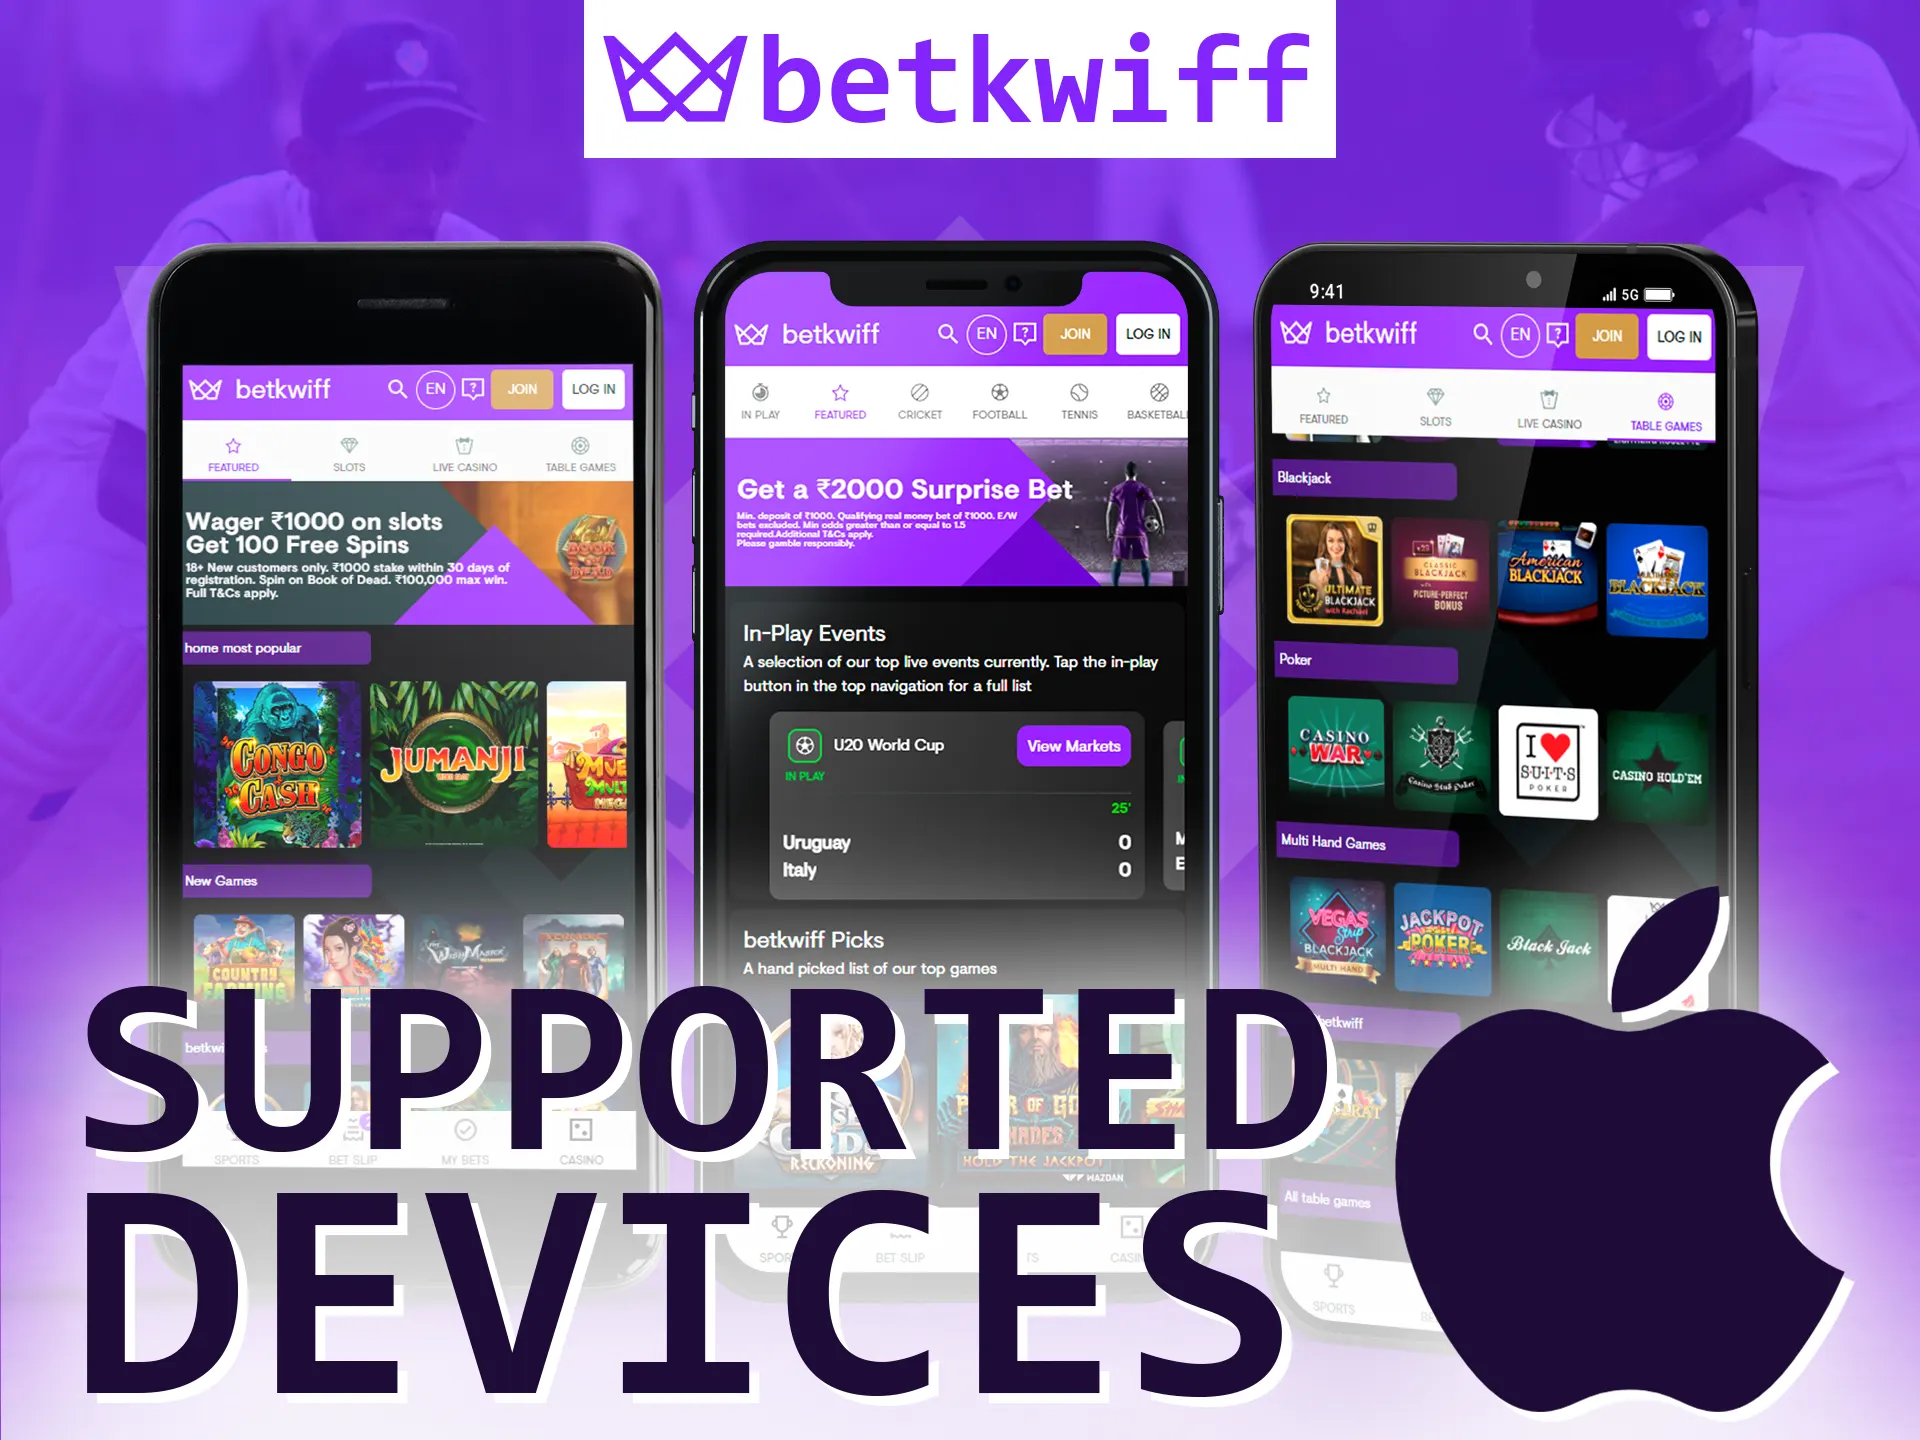 The Betkwiff app can be installed on a variety of iOS devices.